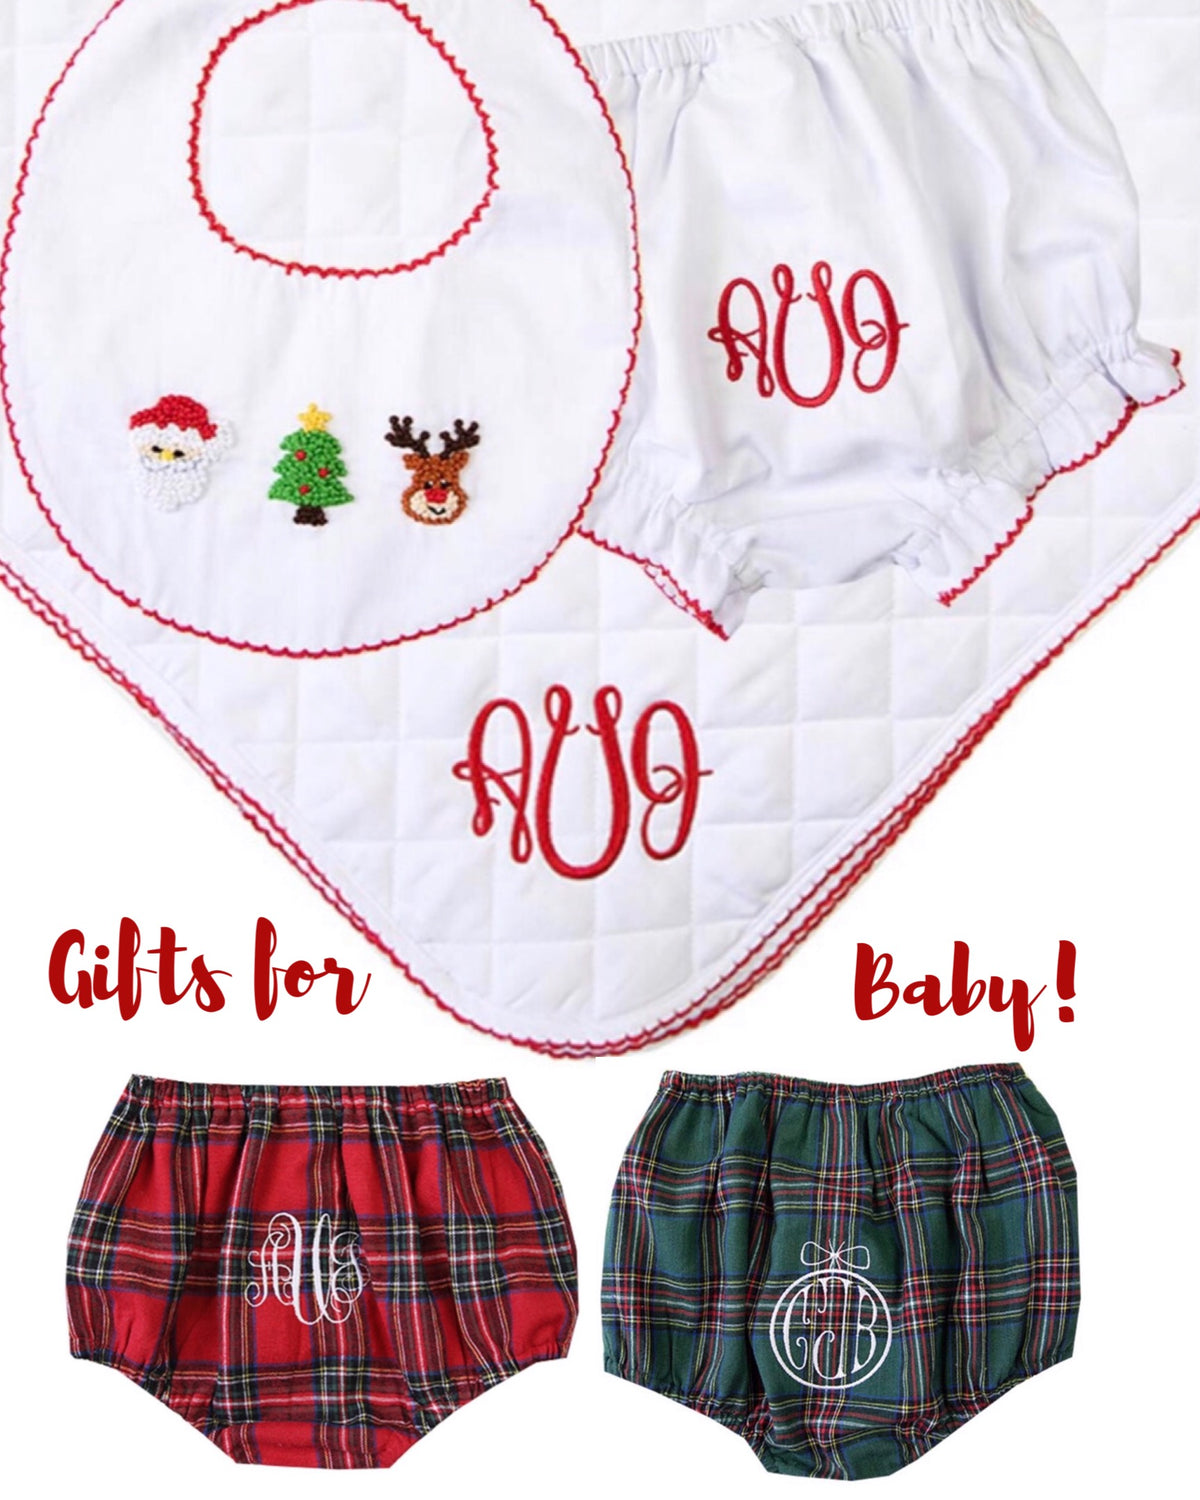 Great Gifts for Baby!